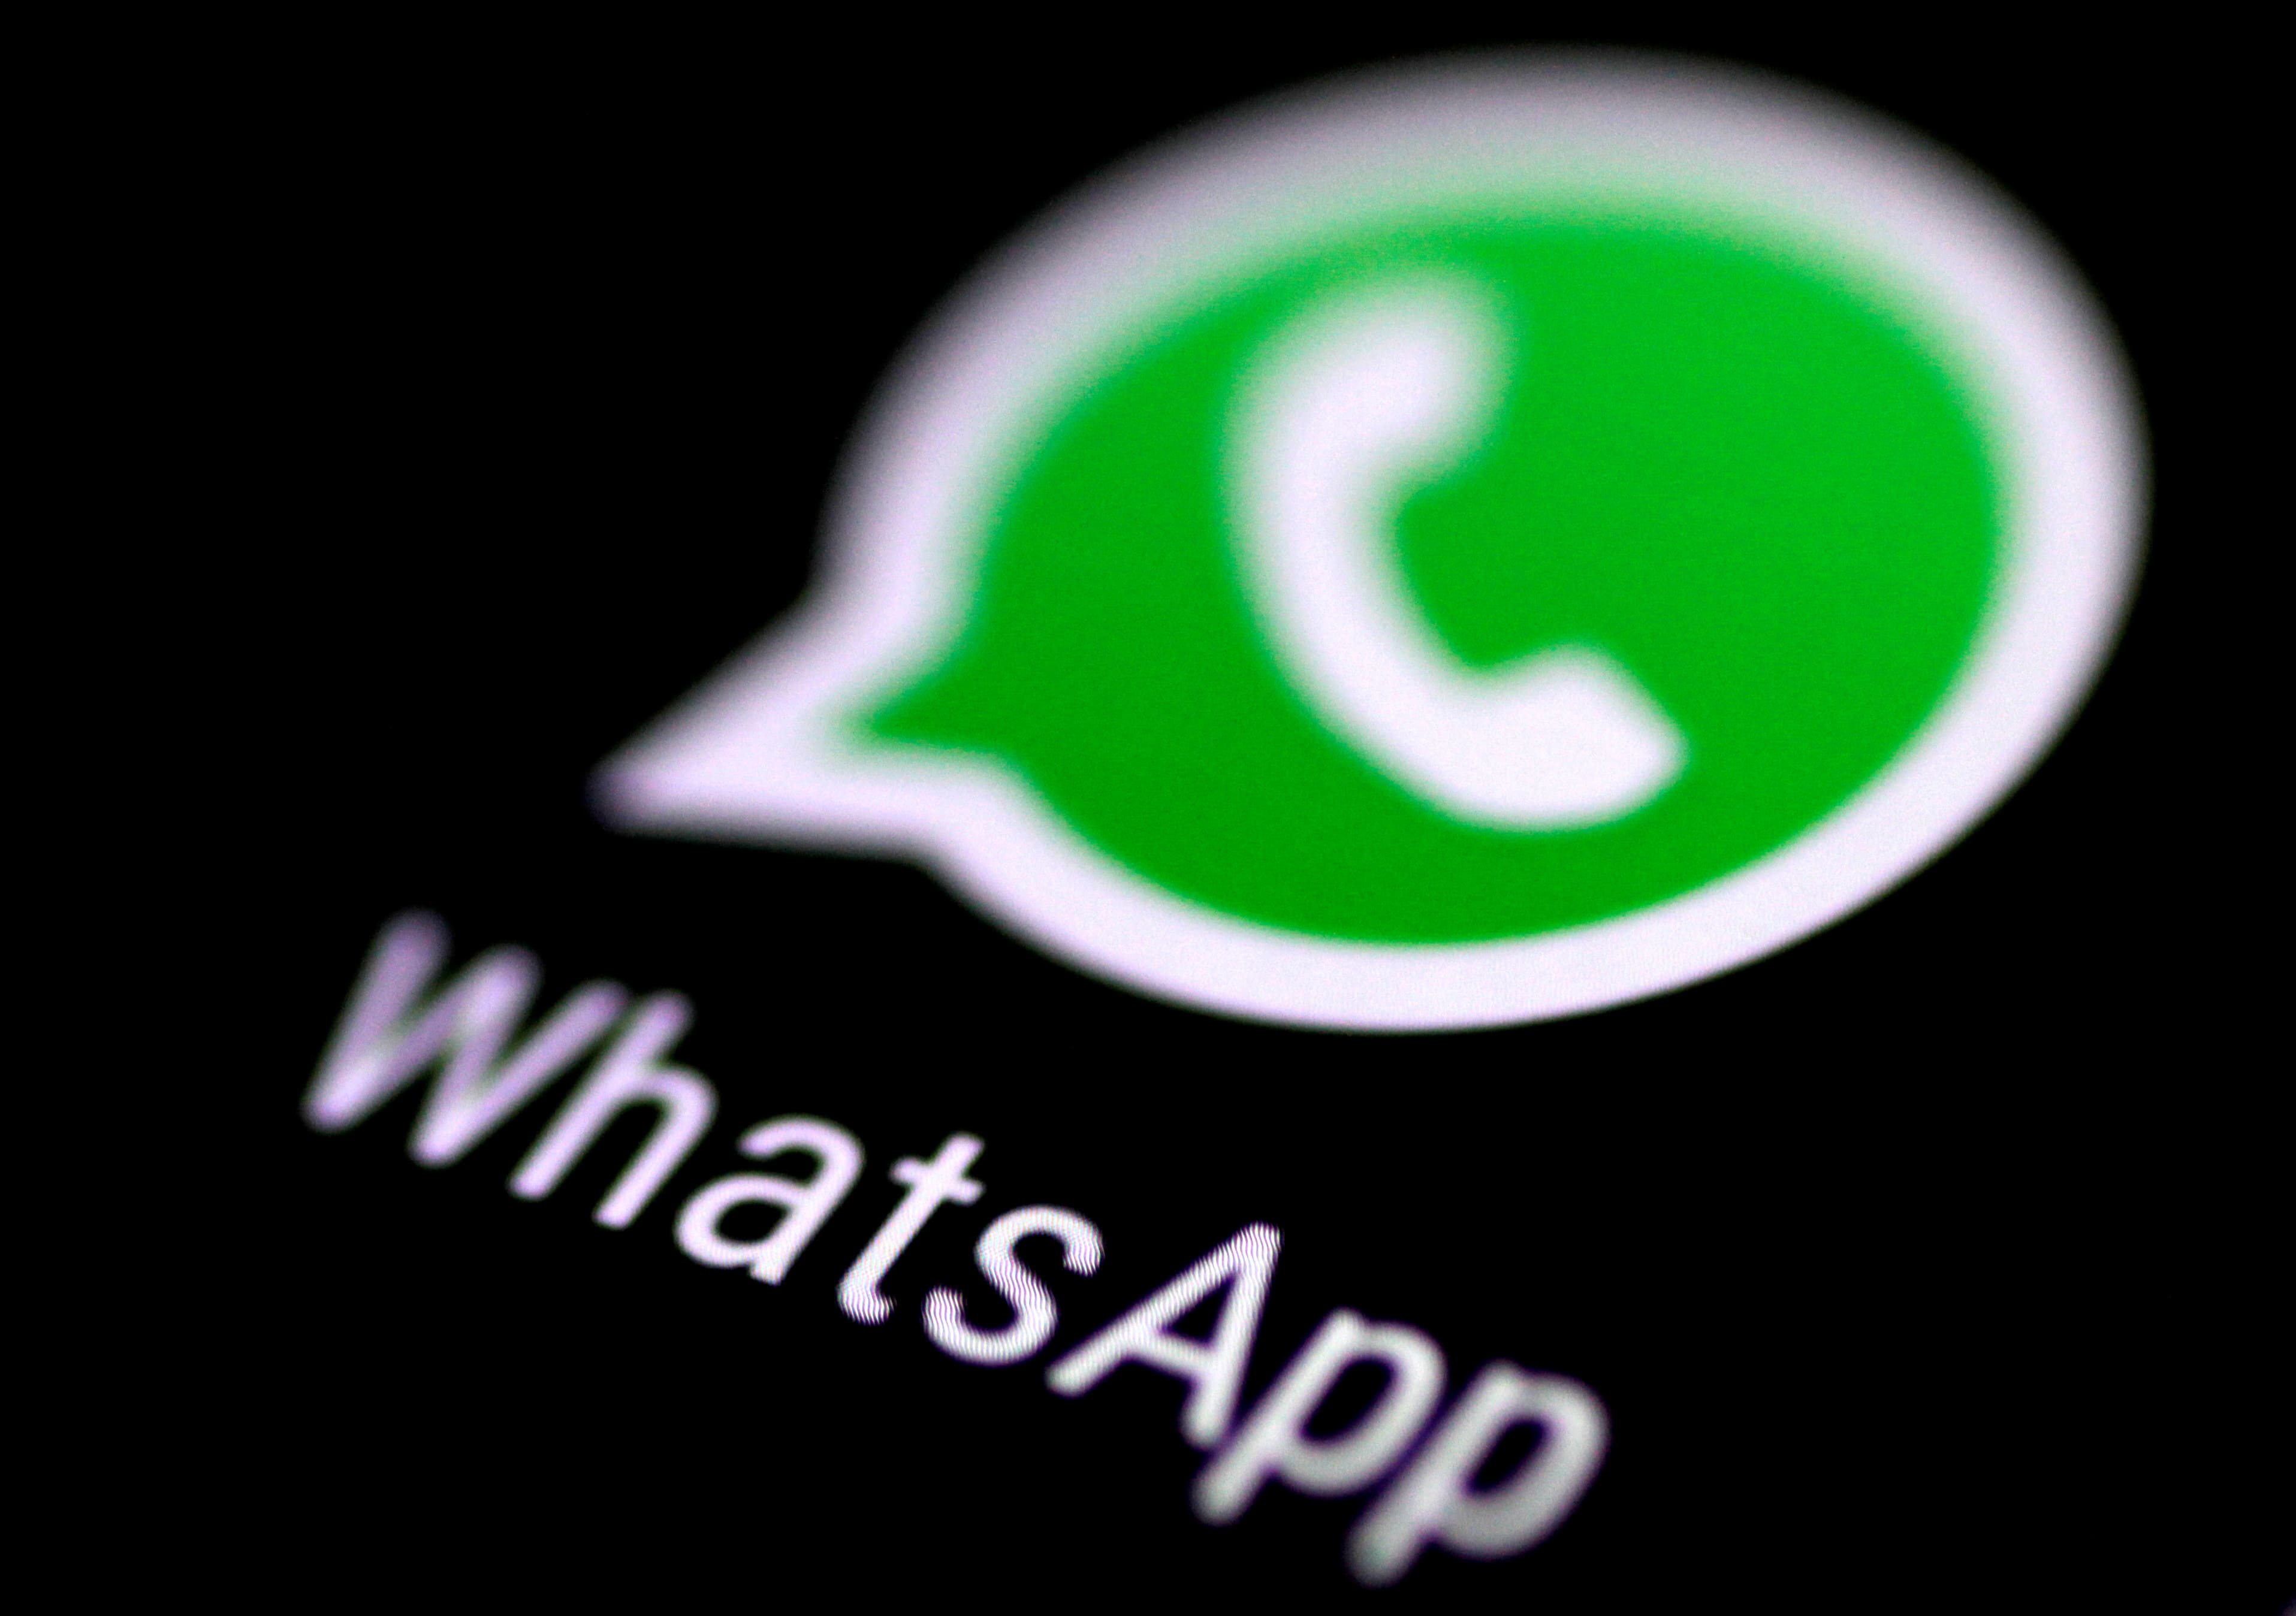 WhatsApp Chat Threads feature available for select beta users on Android: Check how it works  